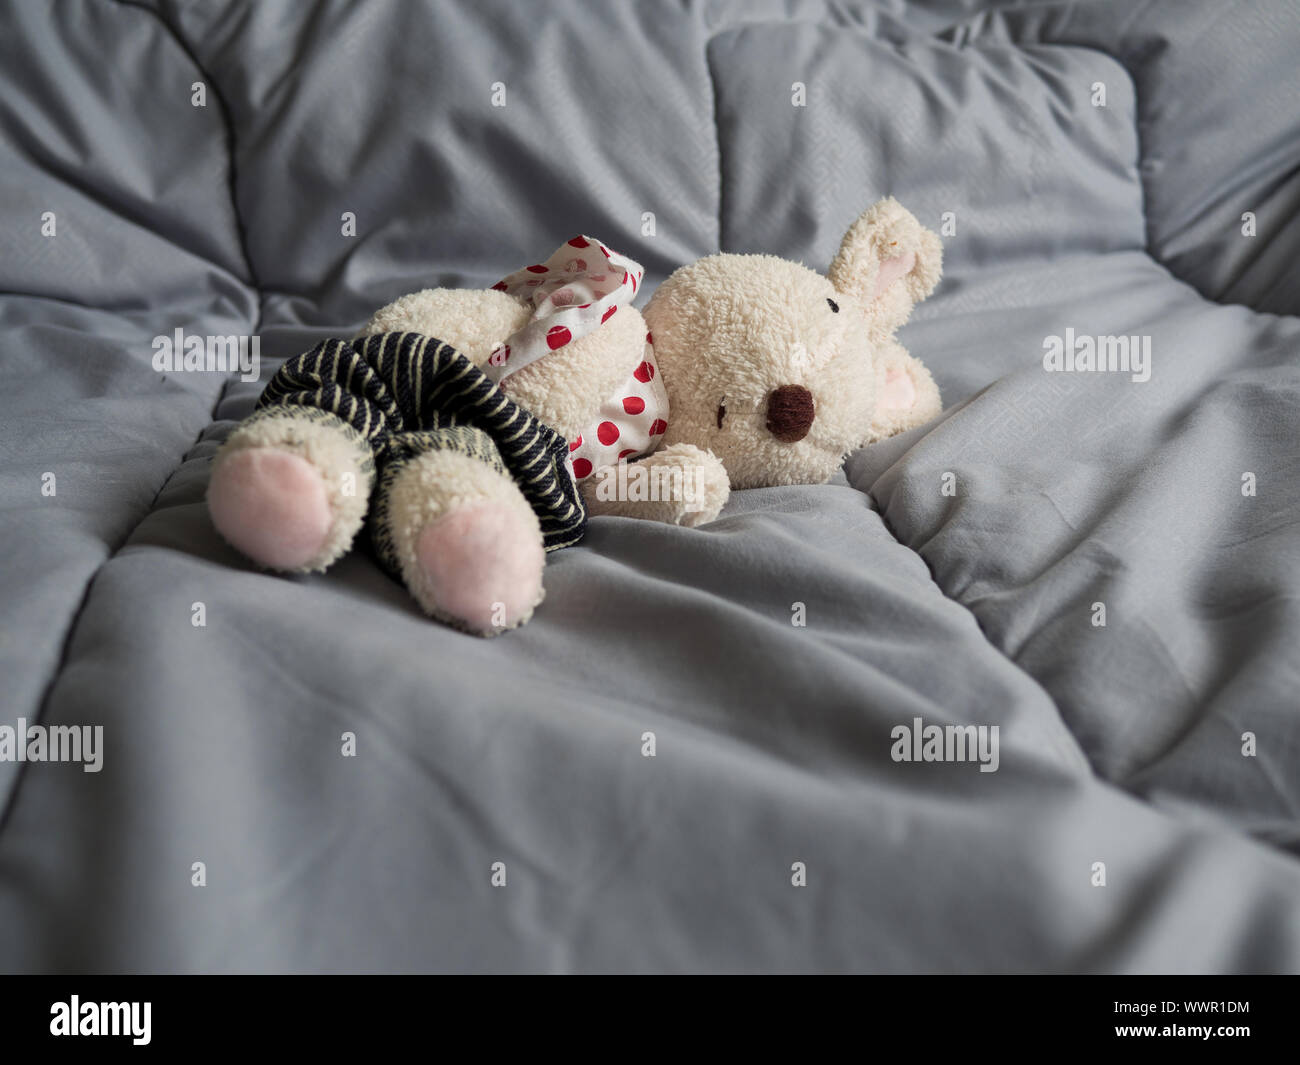 Rabbit doll that was stripped of clothes, statutory rape concept Stock Photo